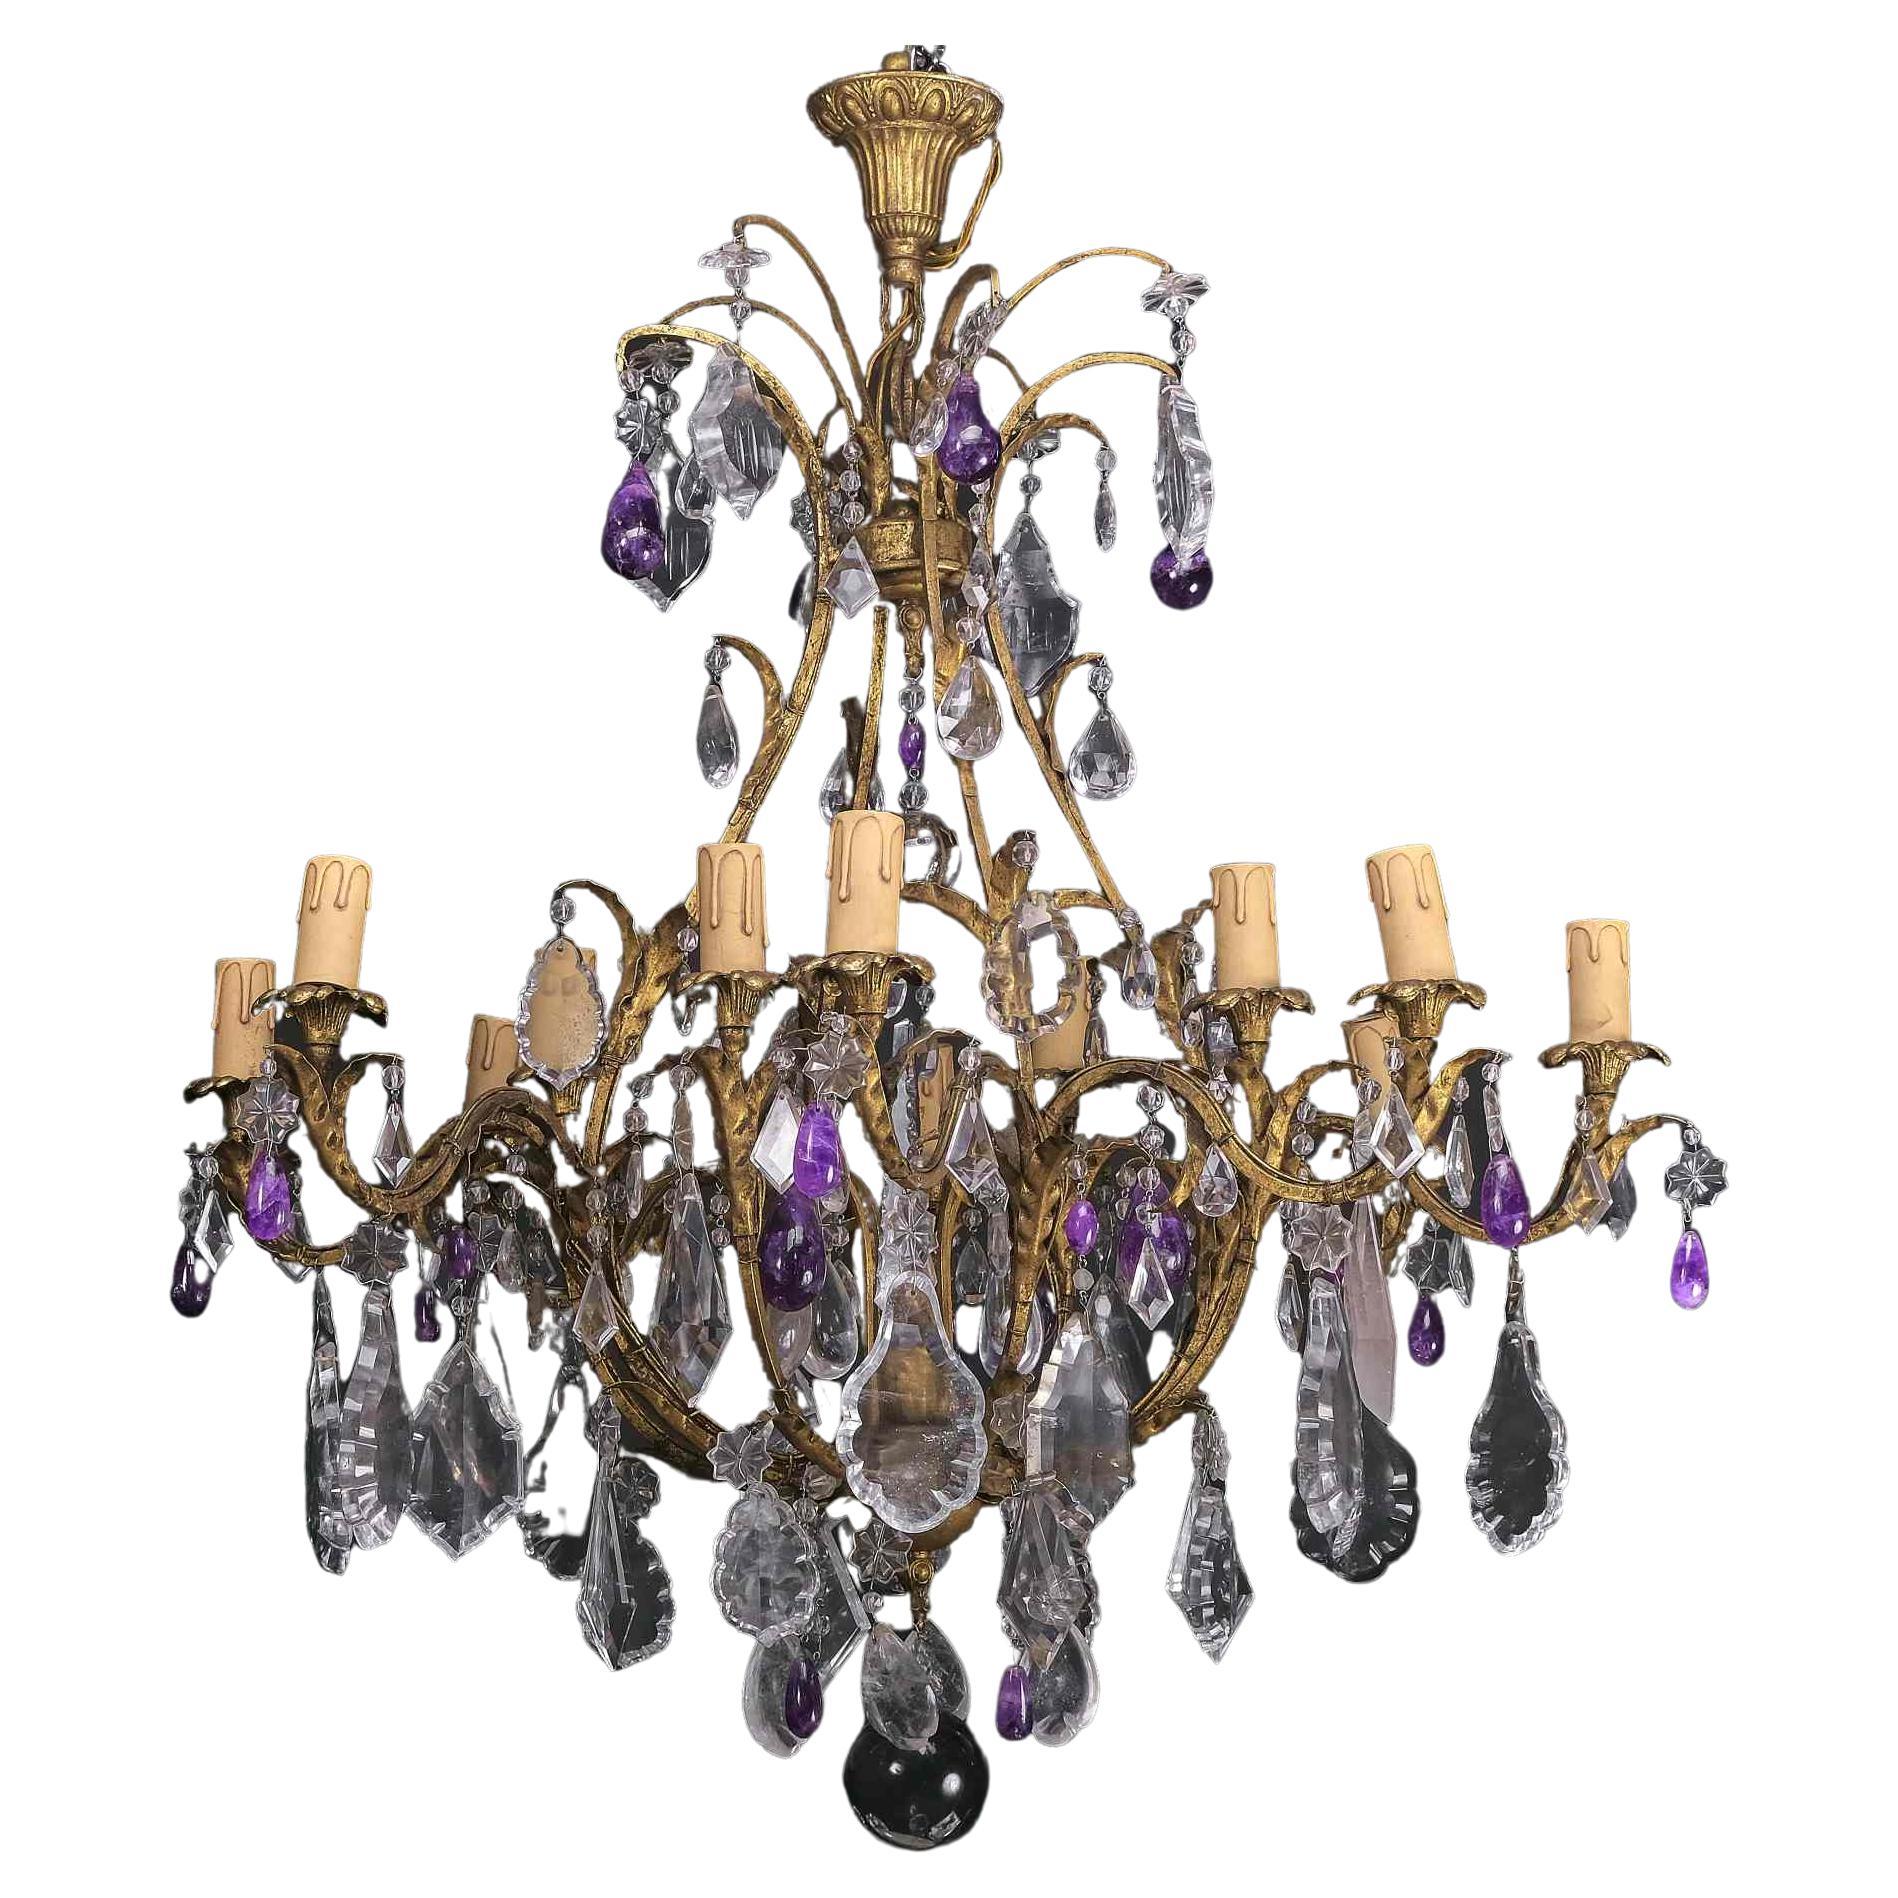 Extraordinary Italian Chandelier in Rock Crystal and Amethyst, Rome 19th Century For Sale